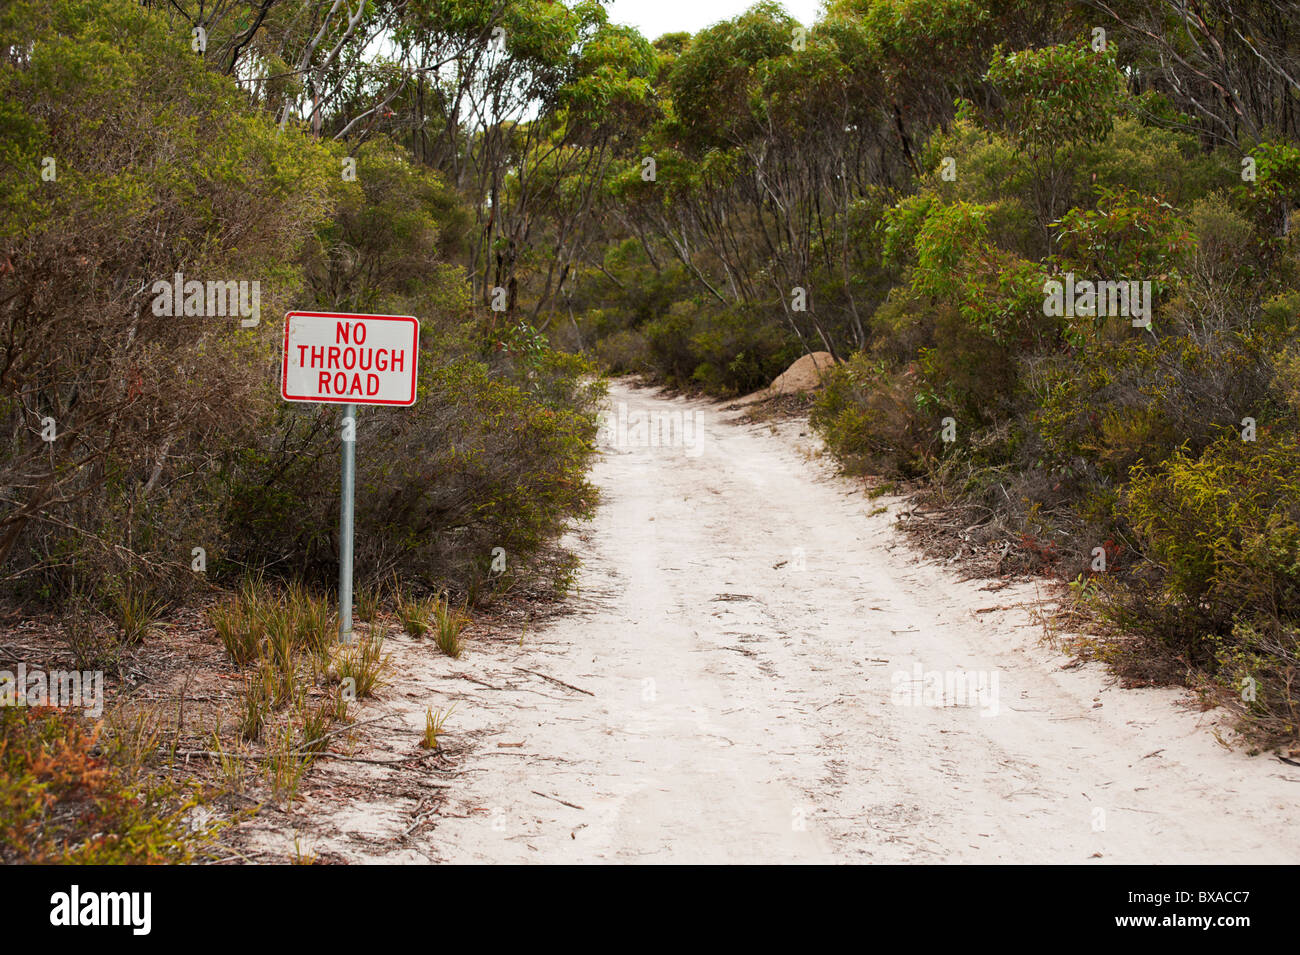 A sandy track through mallee scrub and a 'no through road' sign. Stock Photo